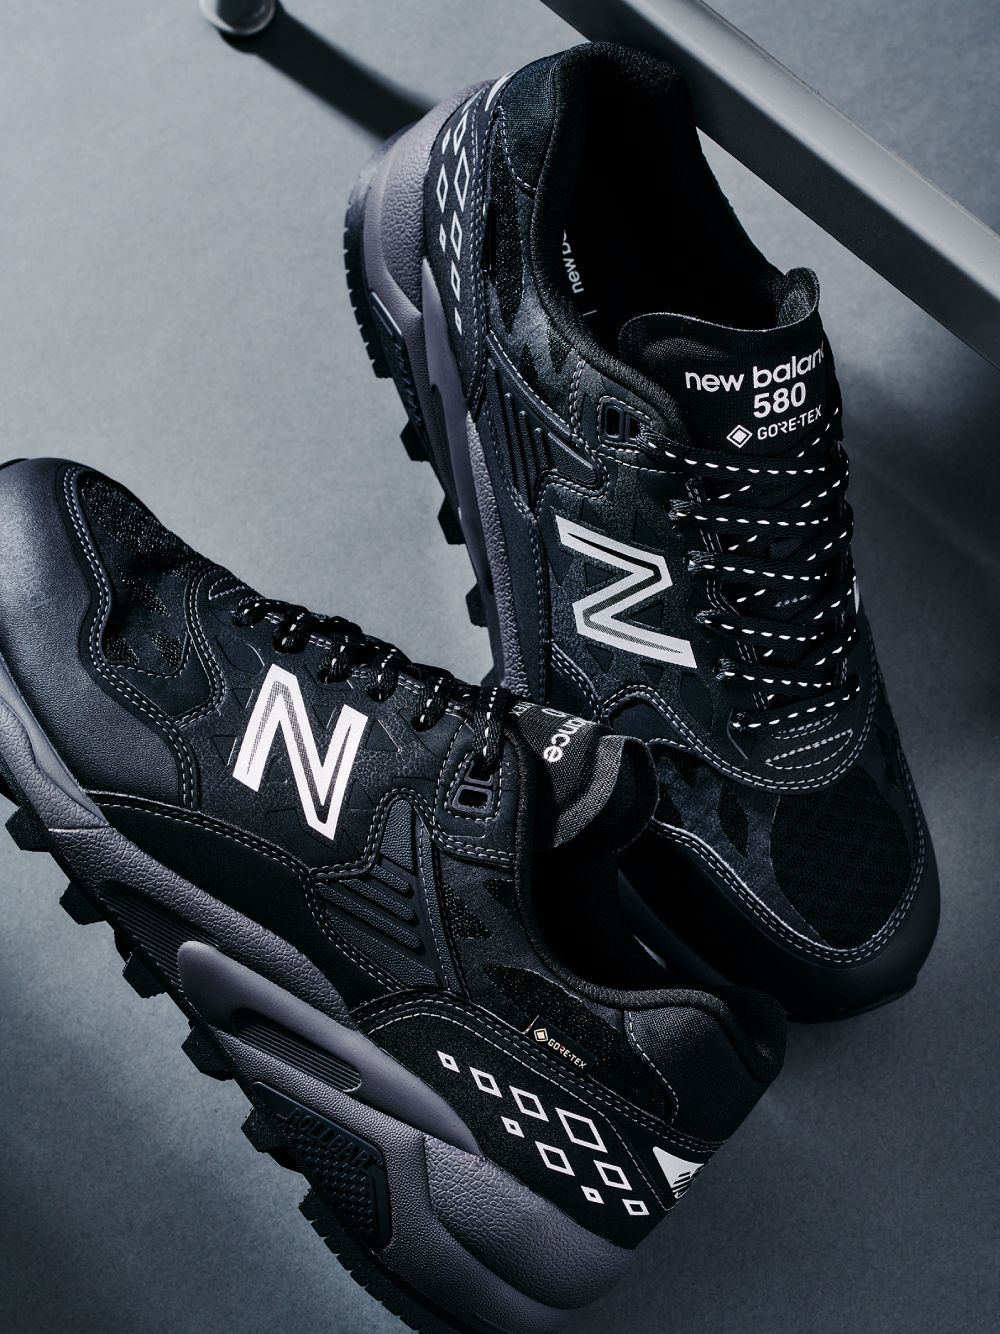 New Balance 580 GTX born from Tokyo street culture Special